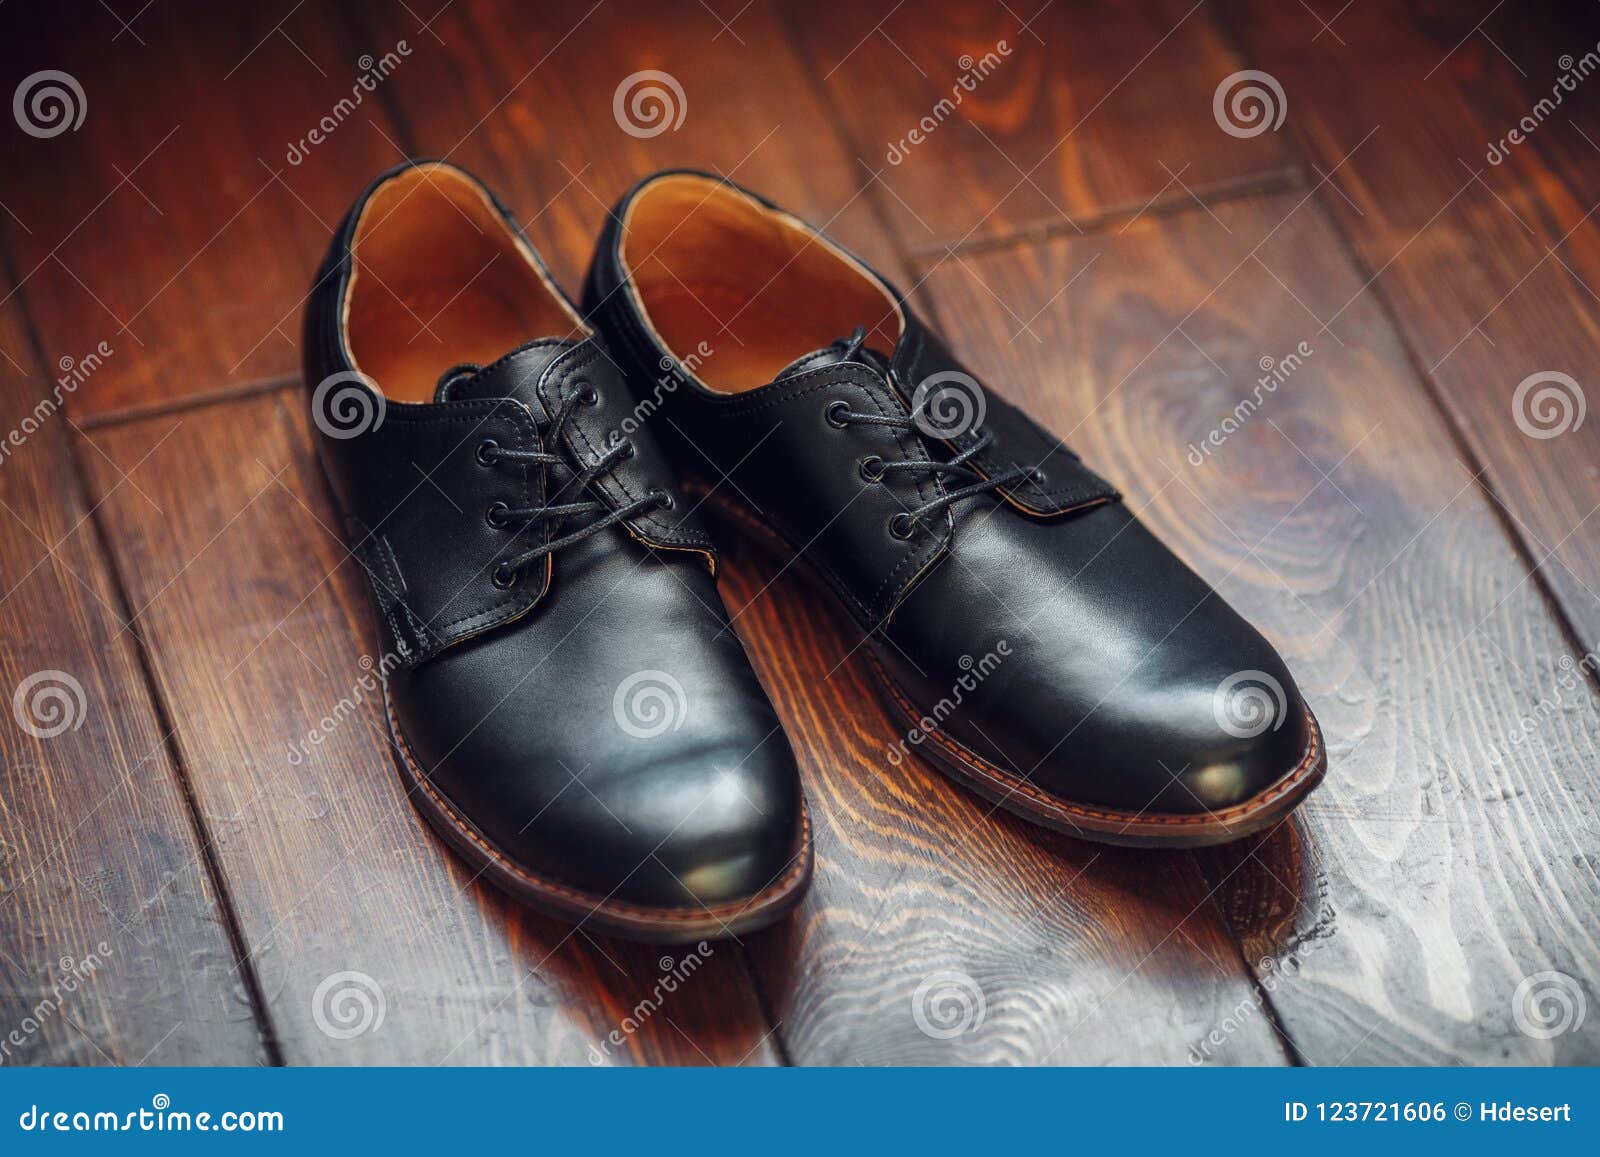 Black Leather Male Shoes on Wooden Background Stock Photo - Image of ...